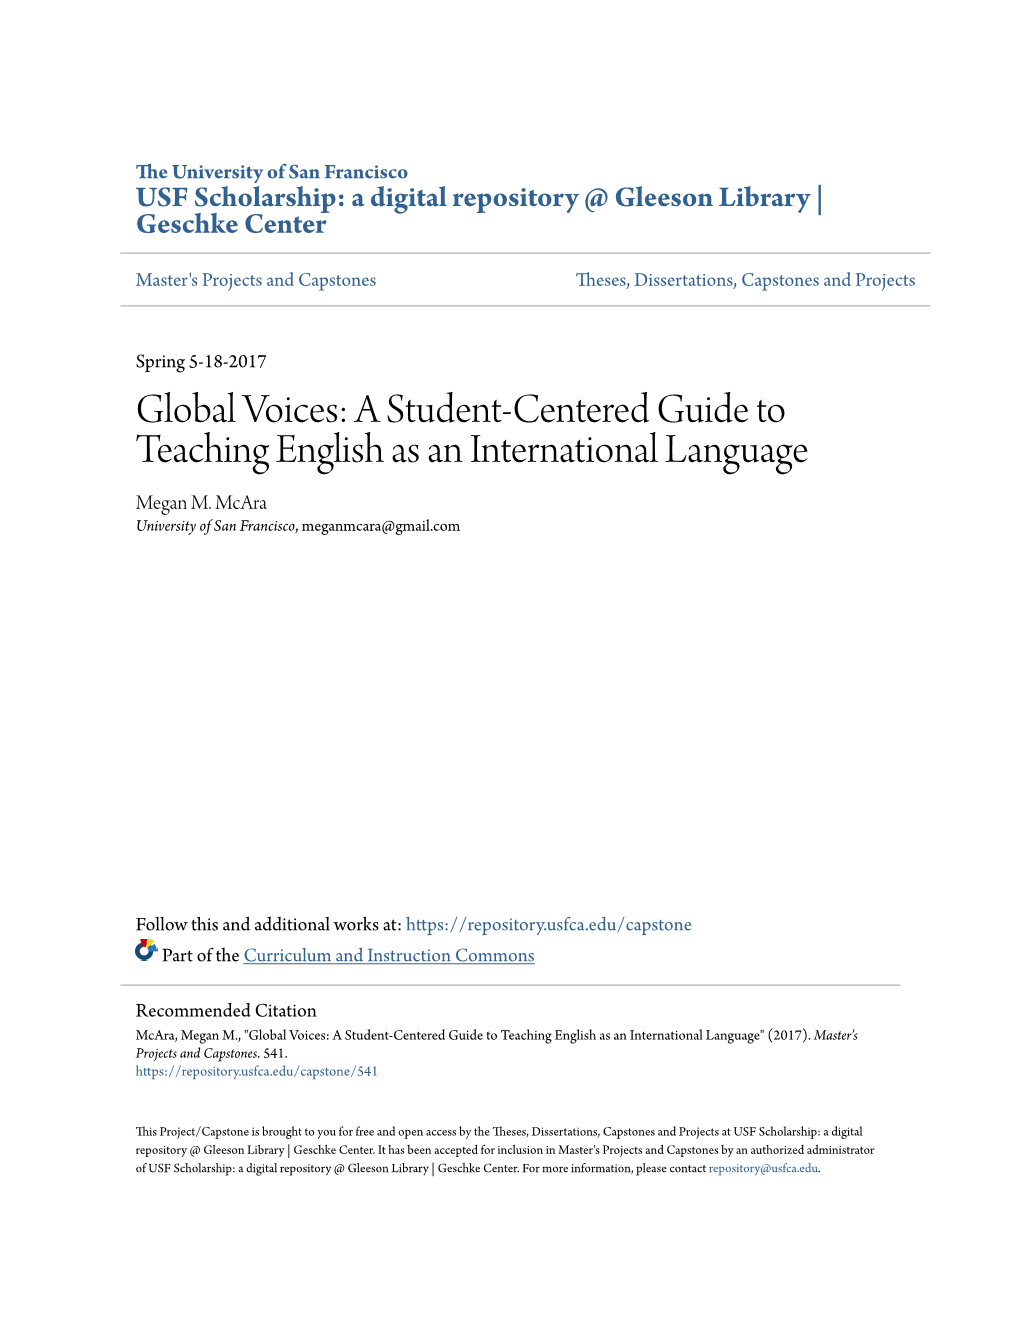 Global Voices: a Student-Centered Guide to Teaching English As an International Language Megan M